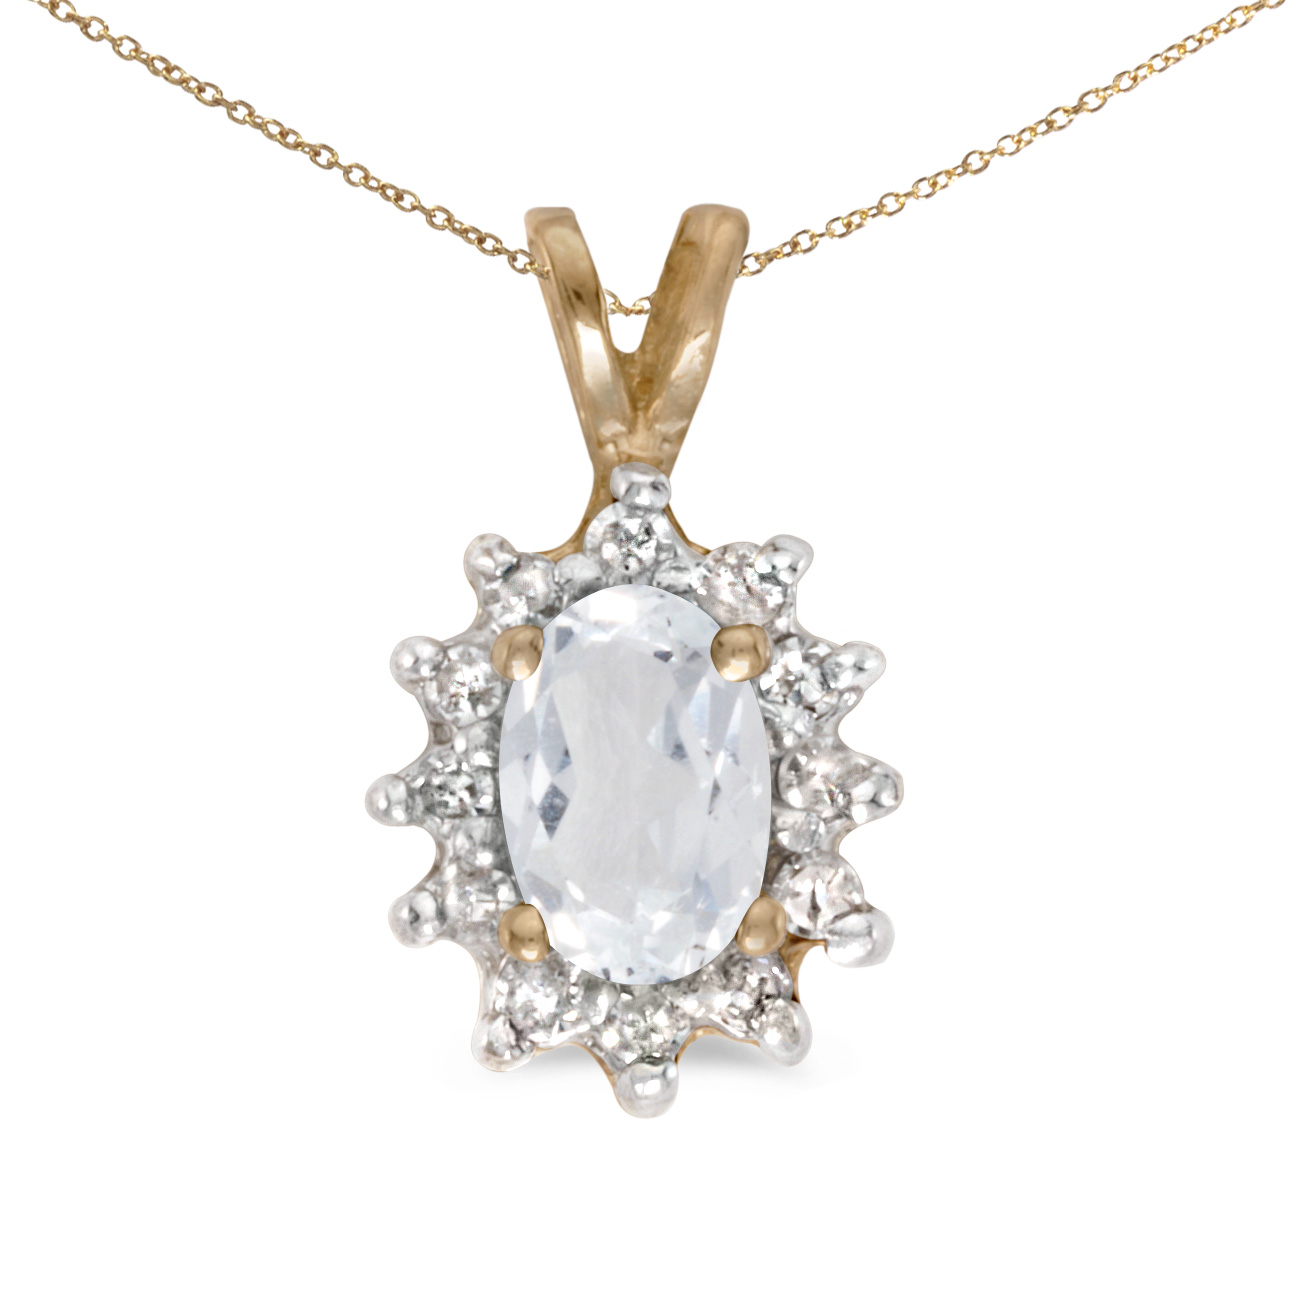 JCX2732: This 14k yellow gold oval white topaz and diamond pendant features a 6x4 mm genuine natural white topaz with a 0.48 ct total weight.